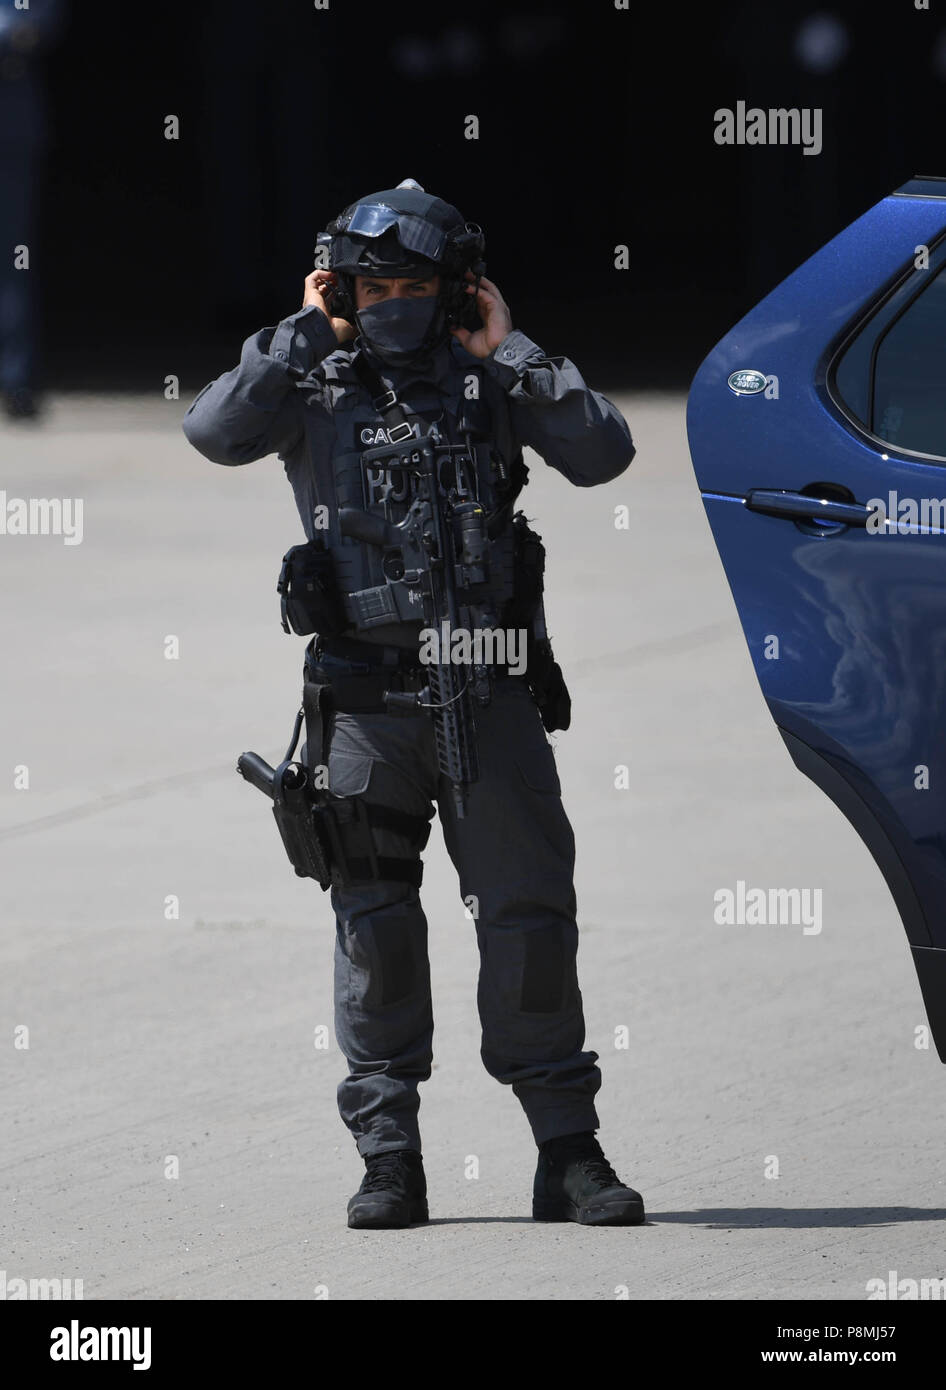 Metropolitan Police Counter Terrorist Specialist Firearms Officer on the tarmac ahead of the the arrival of US President Trump and Melania Trump at Stansted Airport, London for their first official visit to the UK. Stock Photo